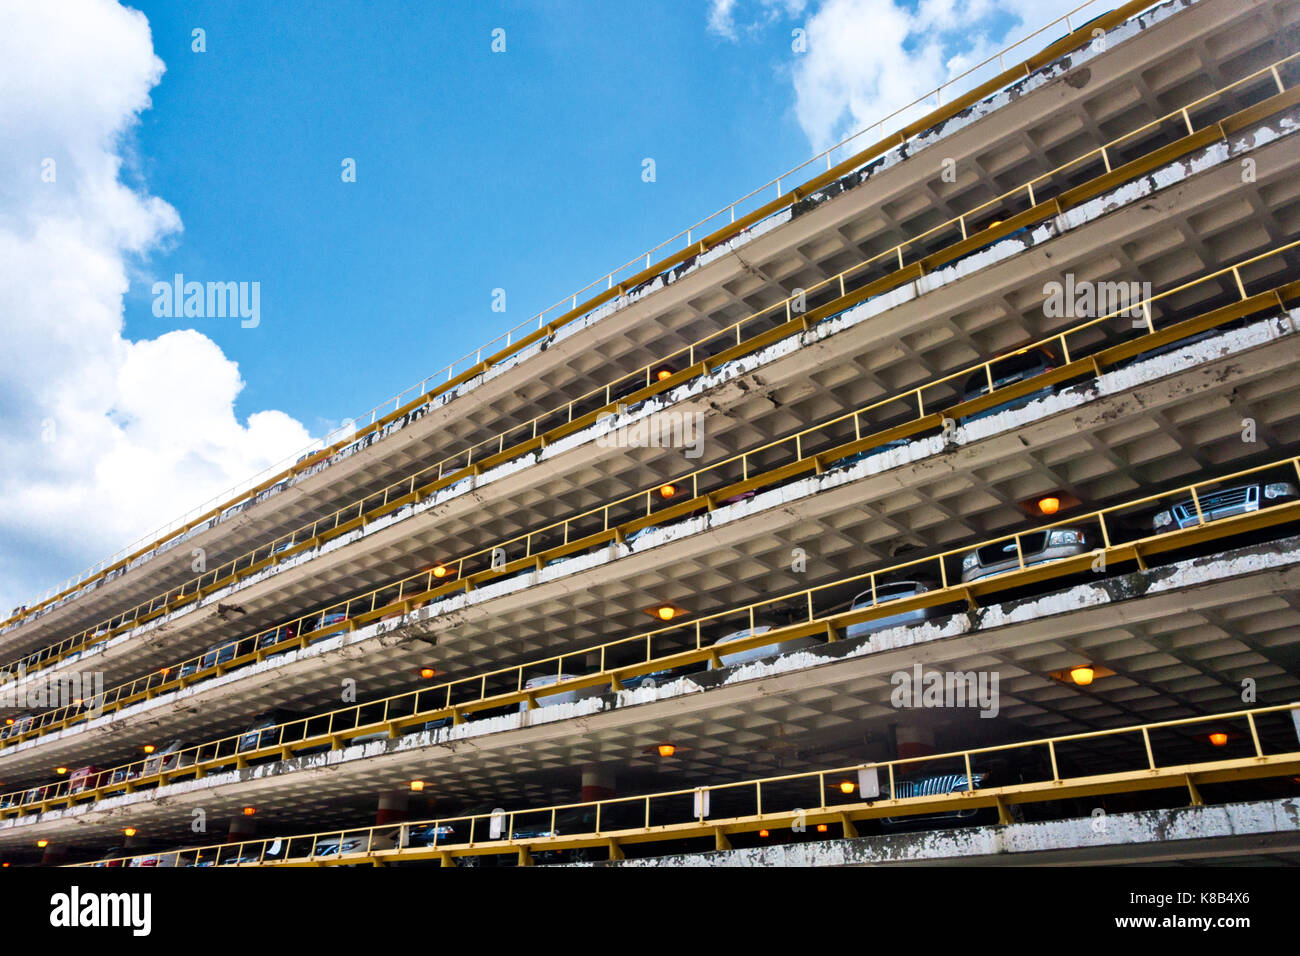 An exterior view of a multi-level parking garage against a blue sky with clouds. Stock Photo